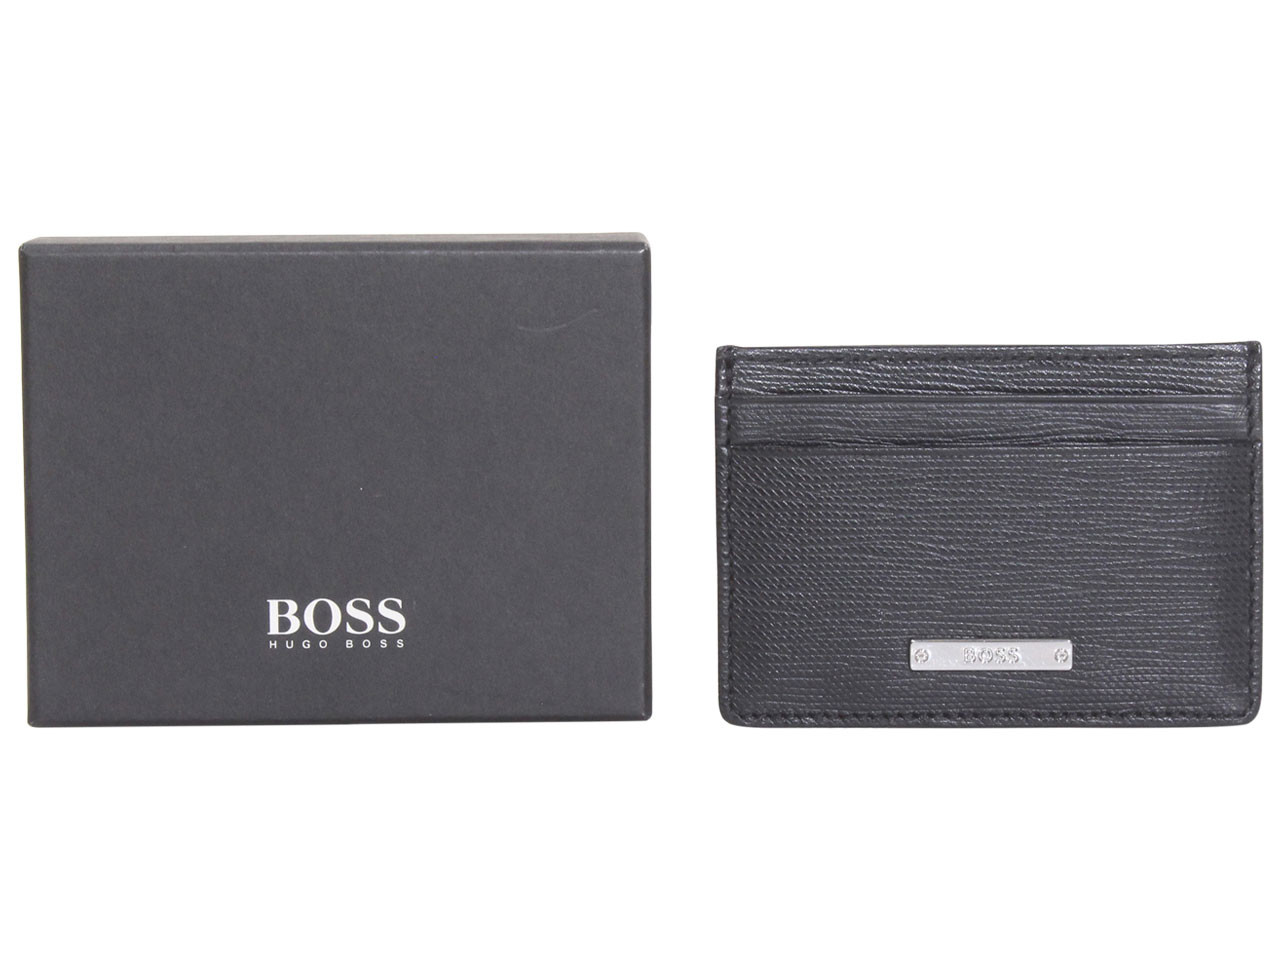 BOSS - Structured money-clip card holder with logo detail